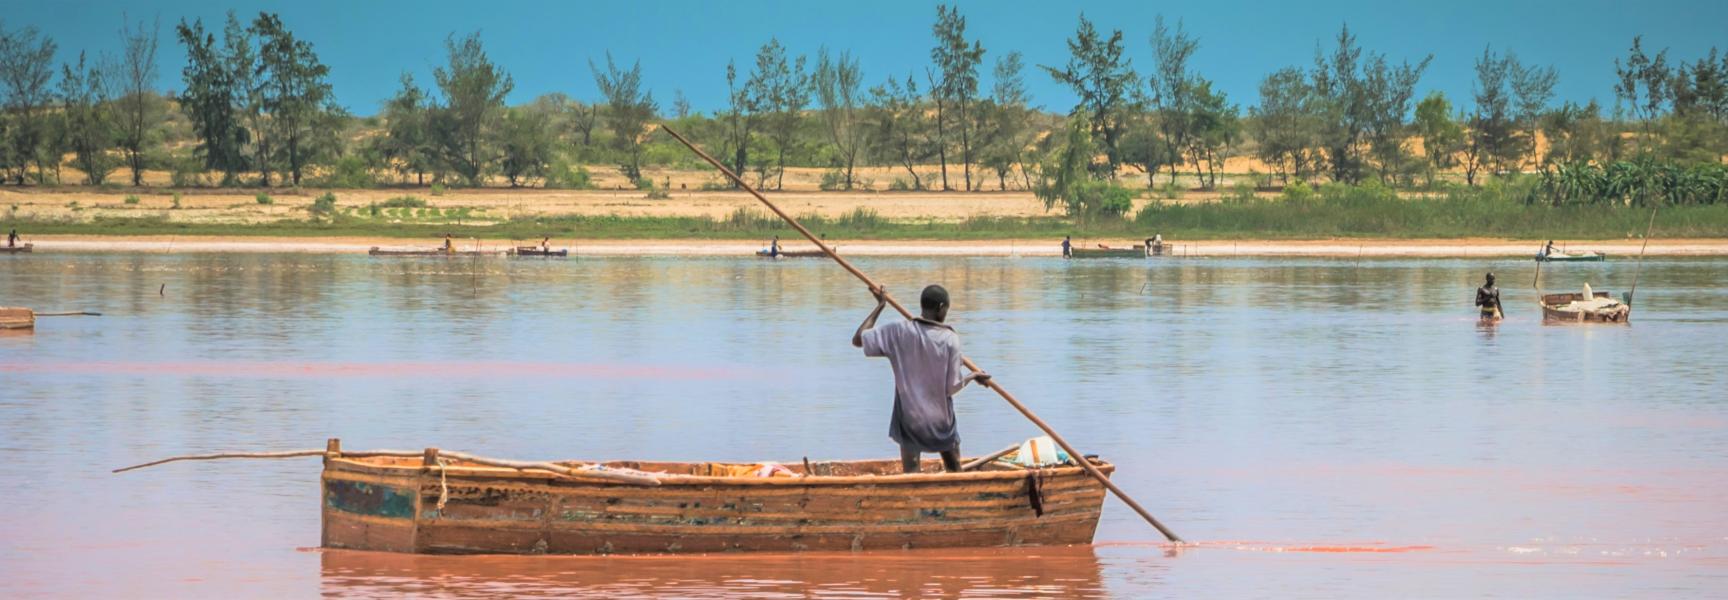 A man on a boat harvesting salt in the Pink Lake in Senegal